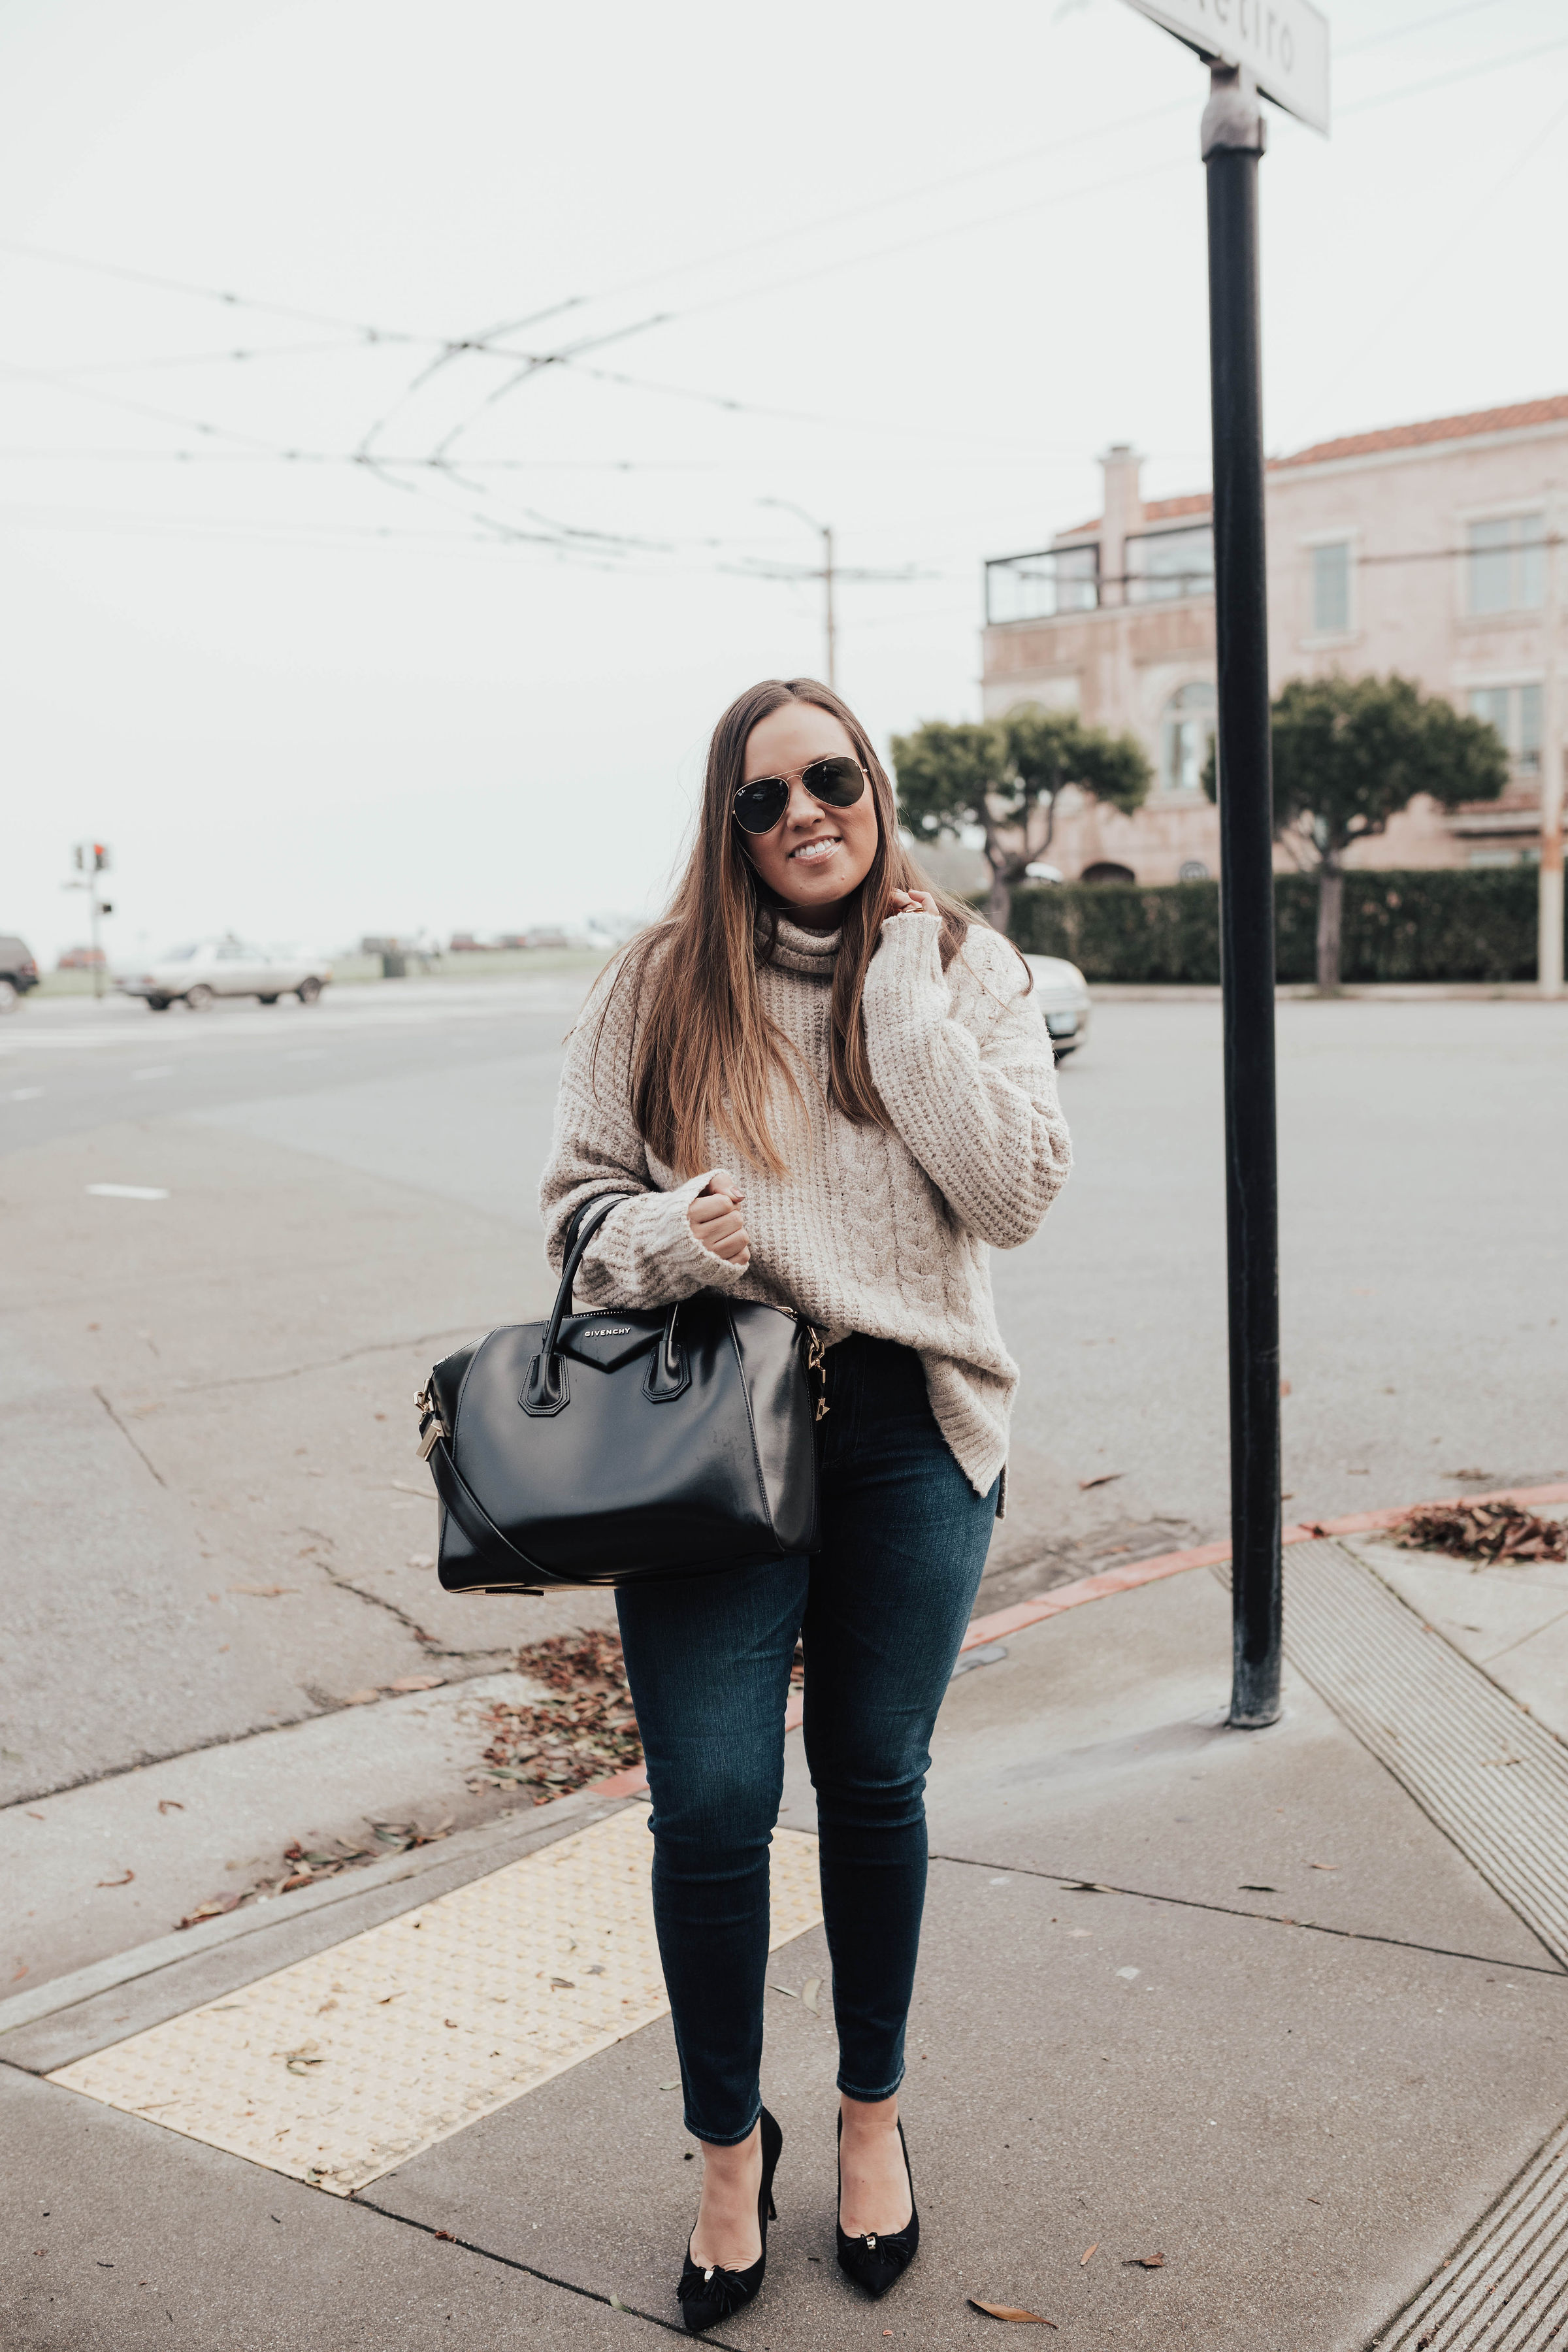 San Francisco blogger, Ashley Zeal, from Two Peas in a Prada shares her favorite jeans from the Evereve Denim Sale. All denim 15% off!